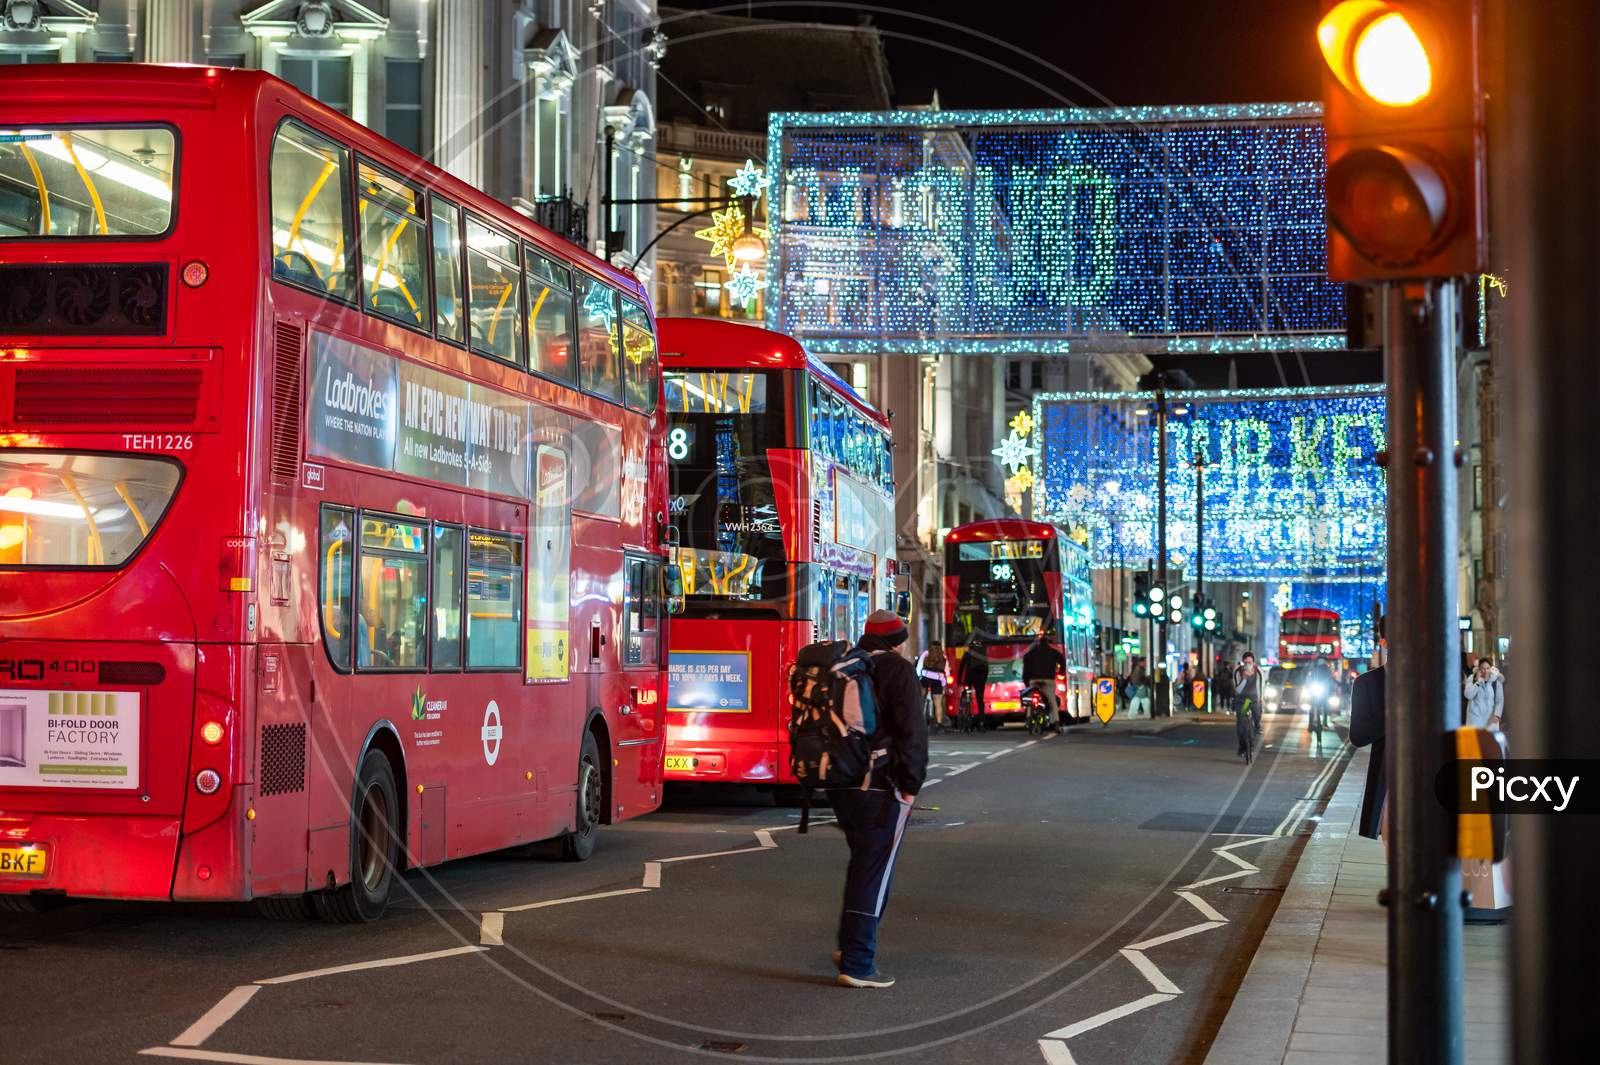 Red London Double Decker Buses With Oxford Street Illuminated Christmas Decorations In The Background